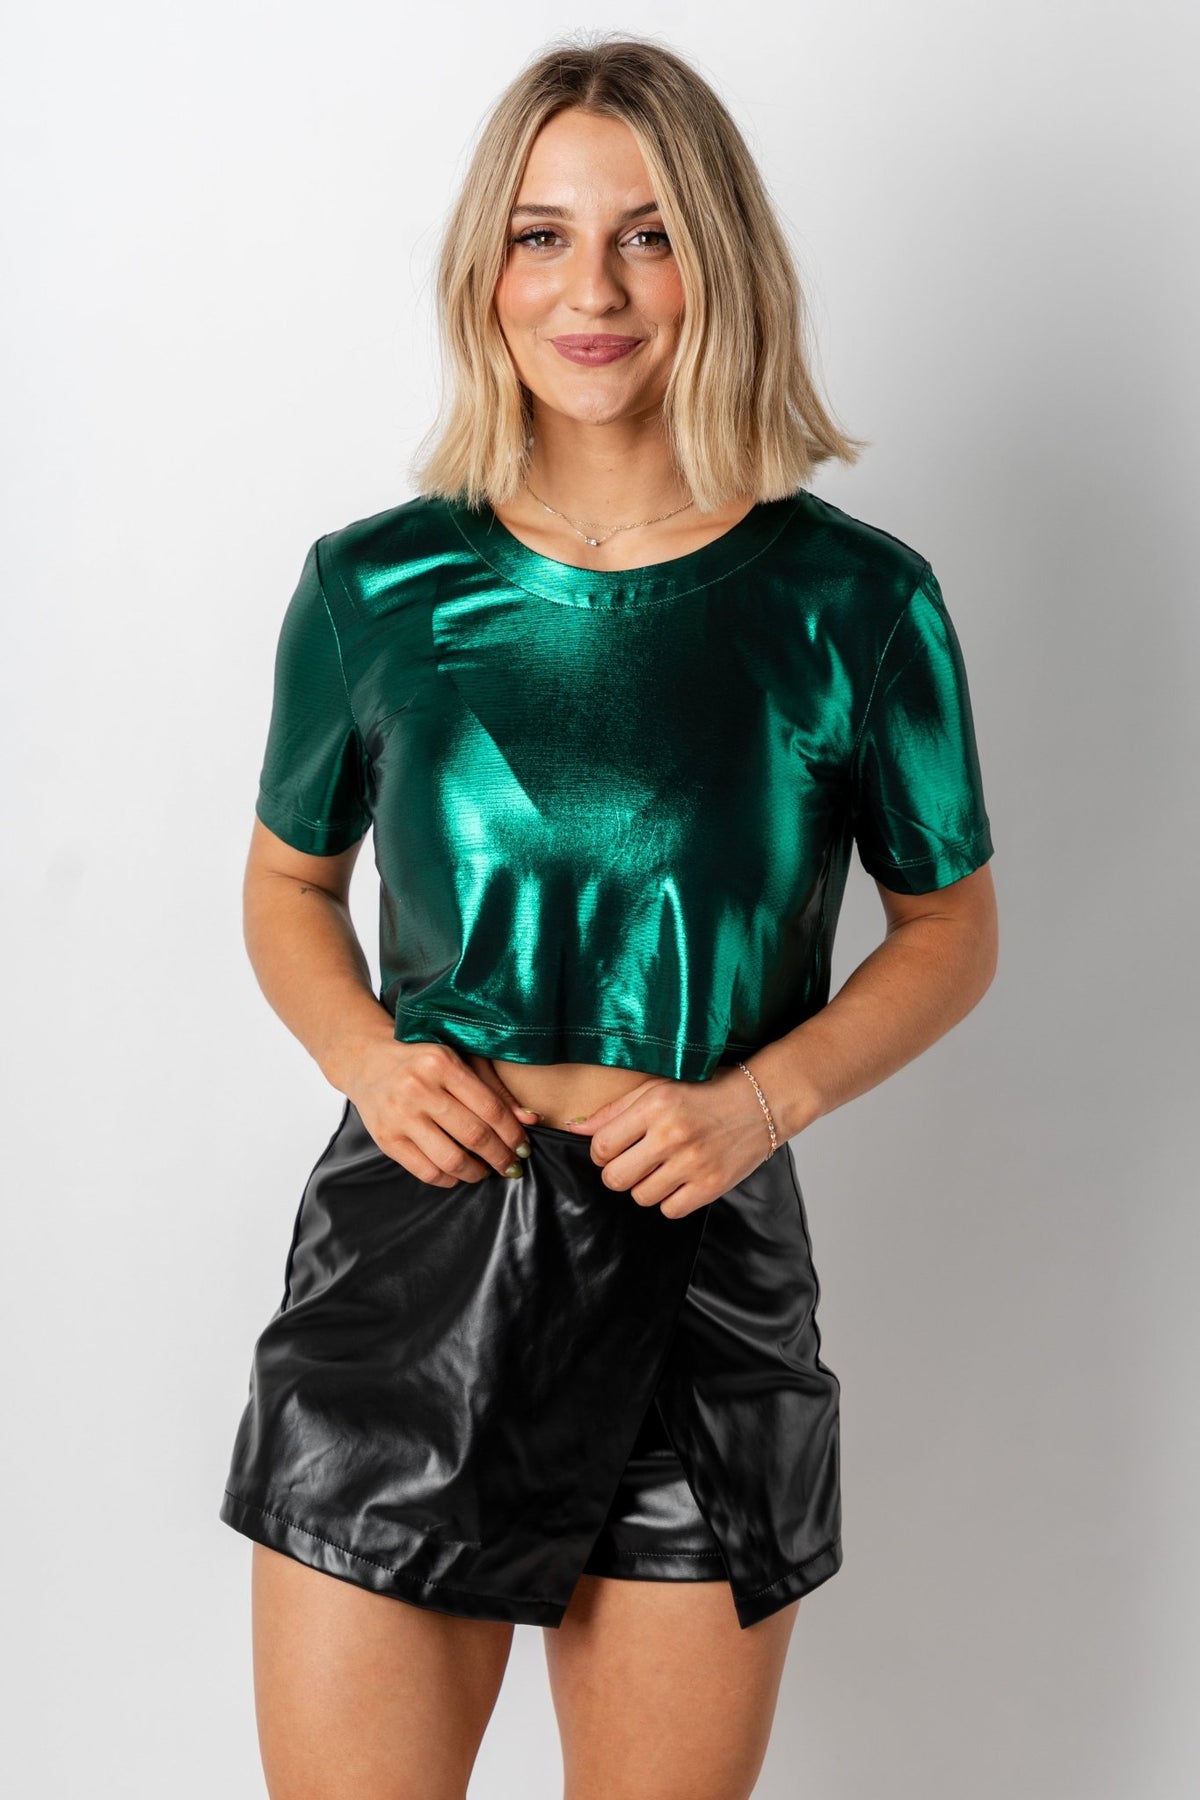 Round neck lurex short sleeve top hunter green - Trendy Holiday Apparel at Lush Fashion Lounge Boutique in Oklahoma City